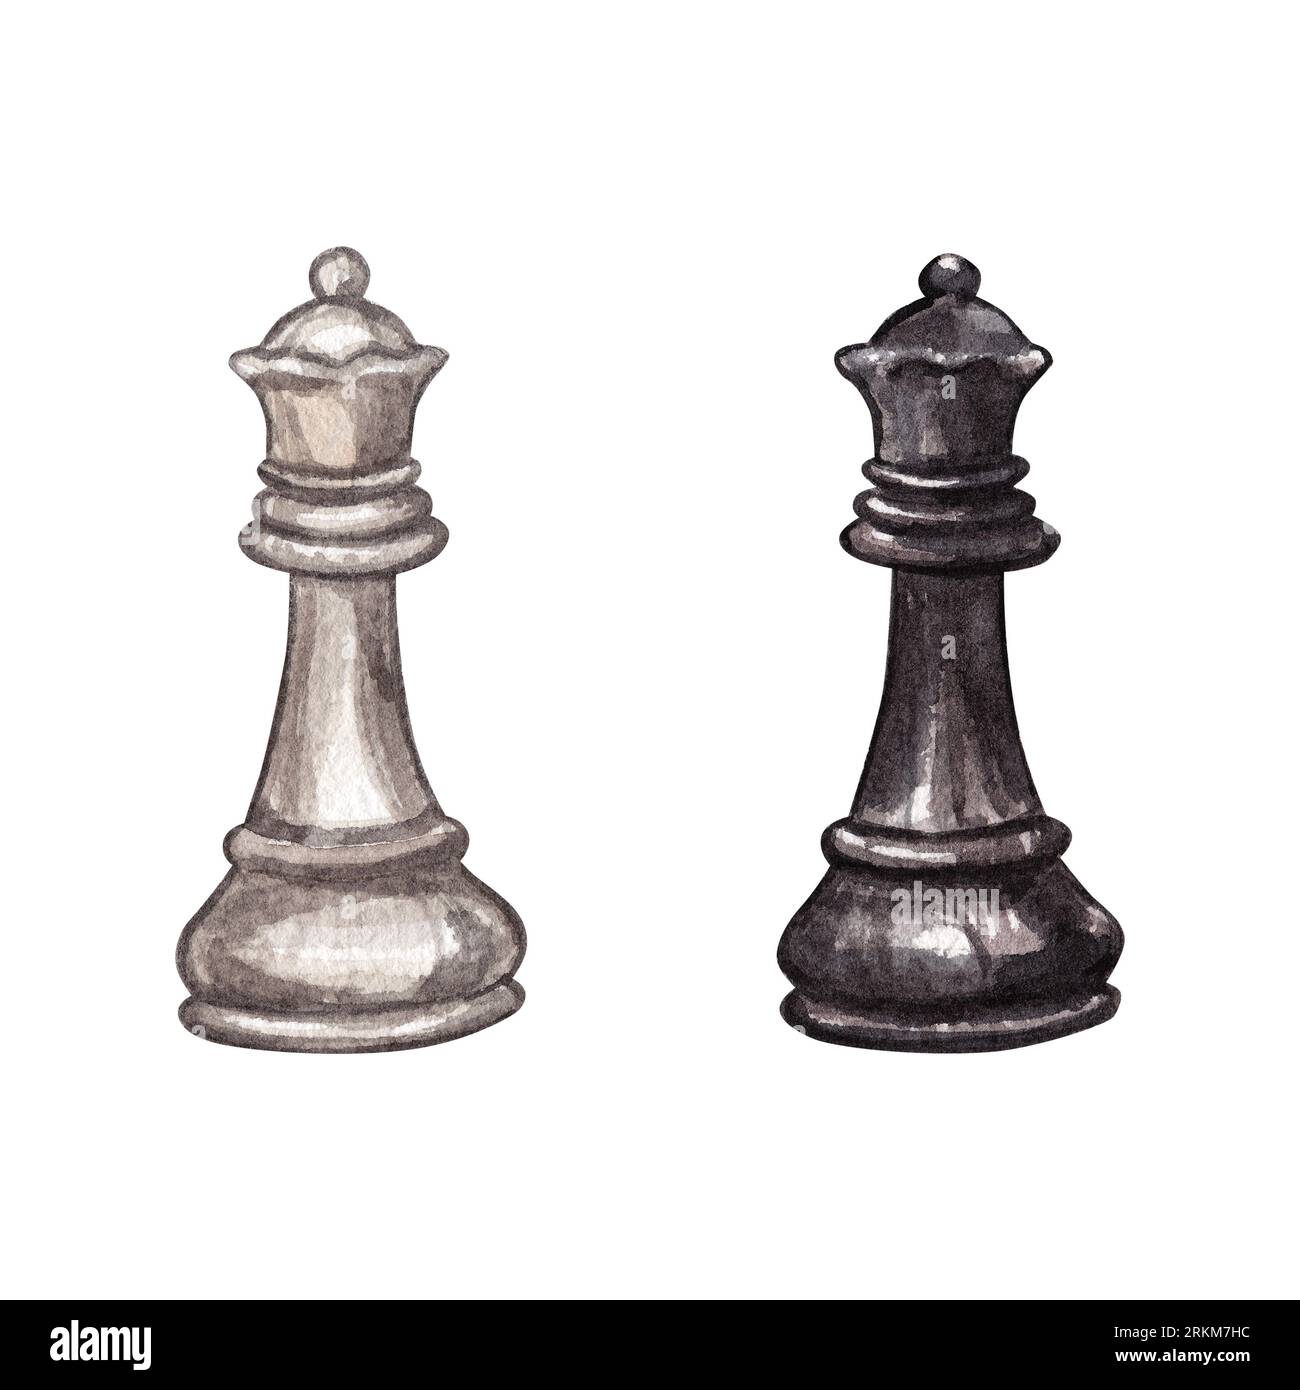 Chess play sketch Cut Out Stock Images & Pictures - Alamy